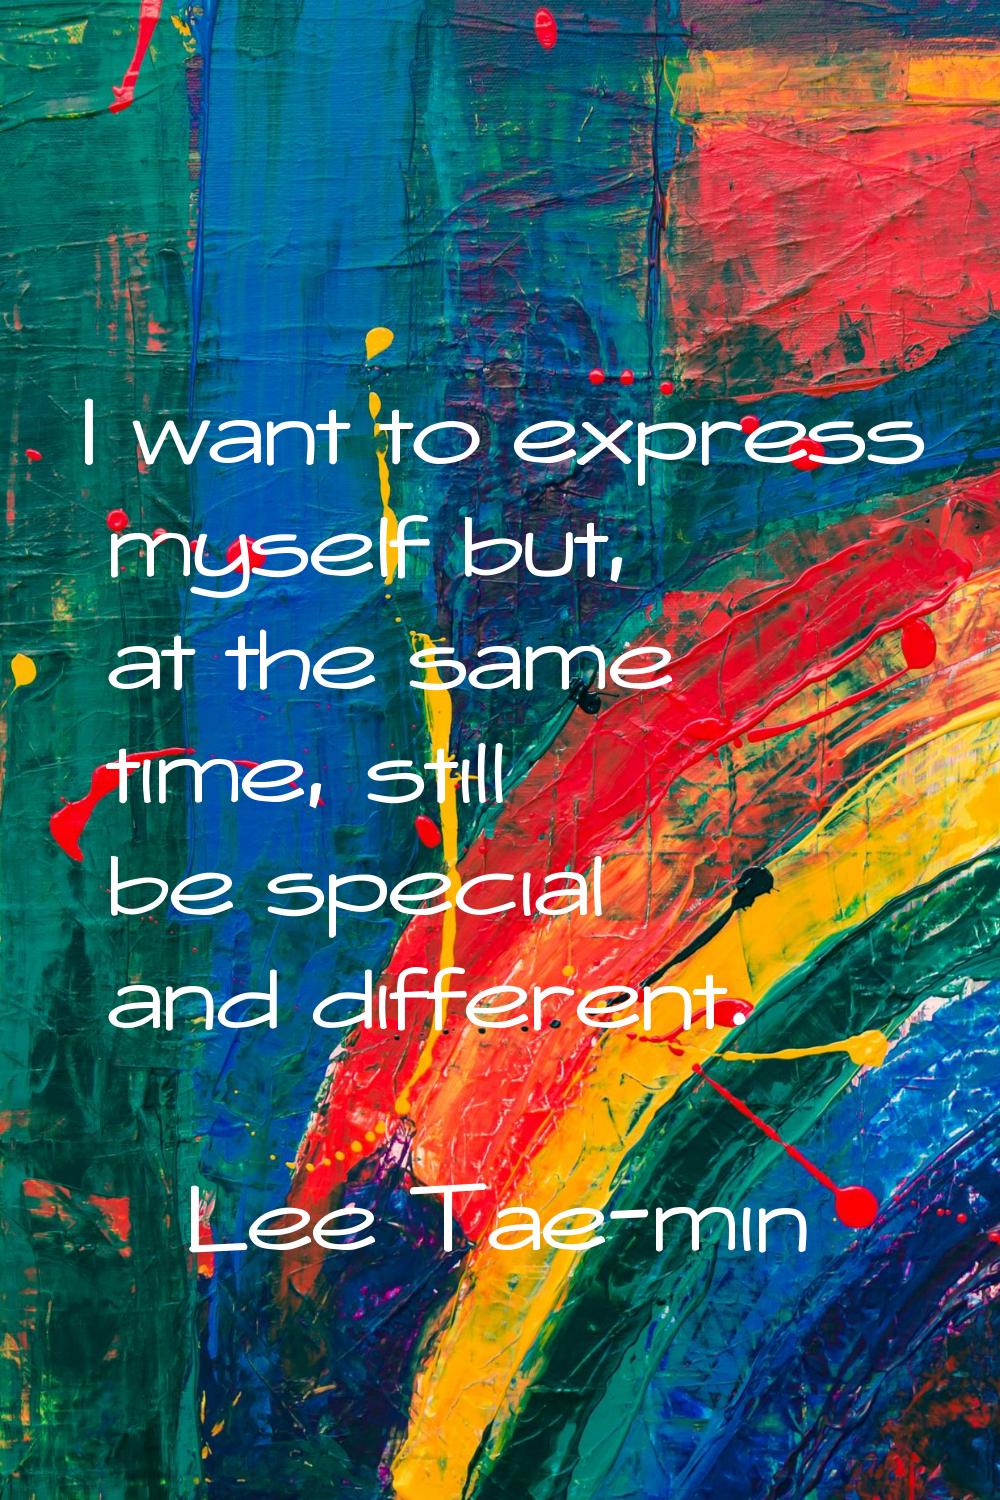 I want to express myself but, at the same time, still be special and different.